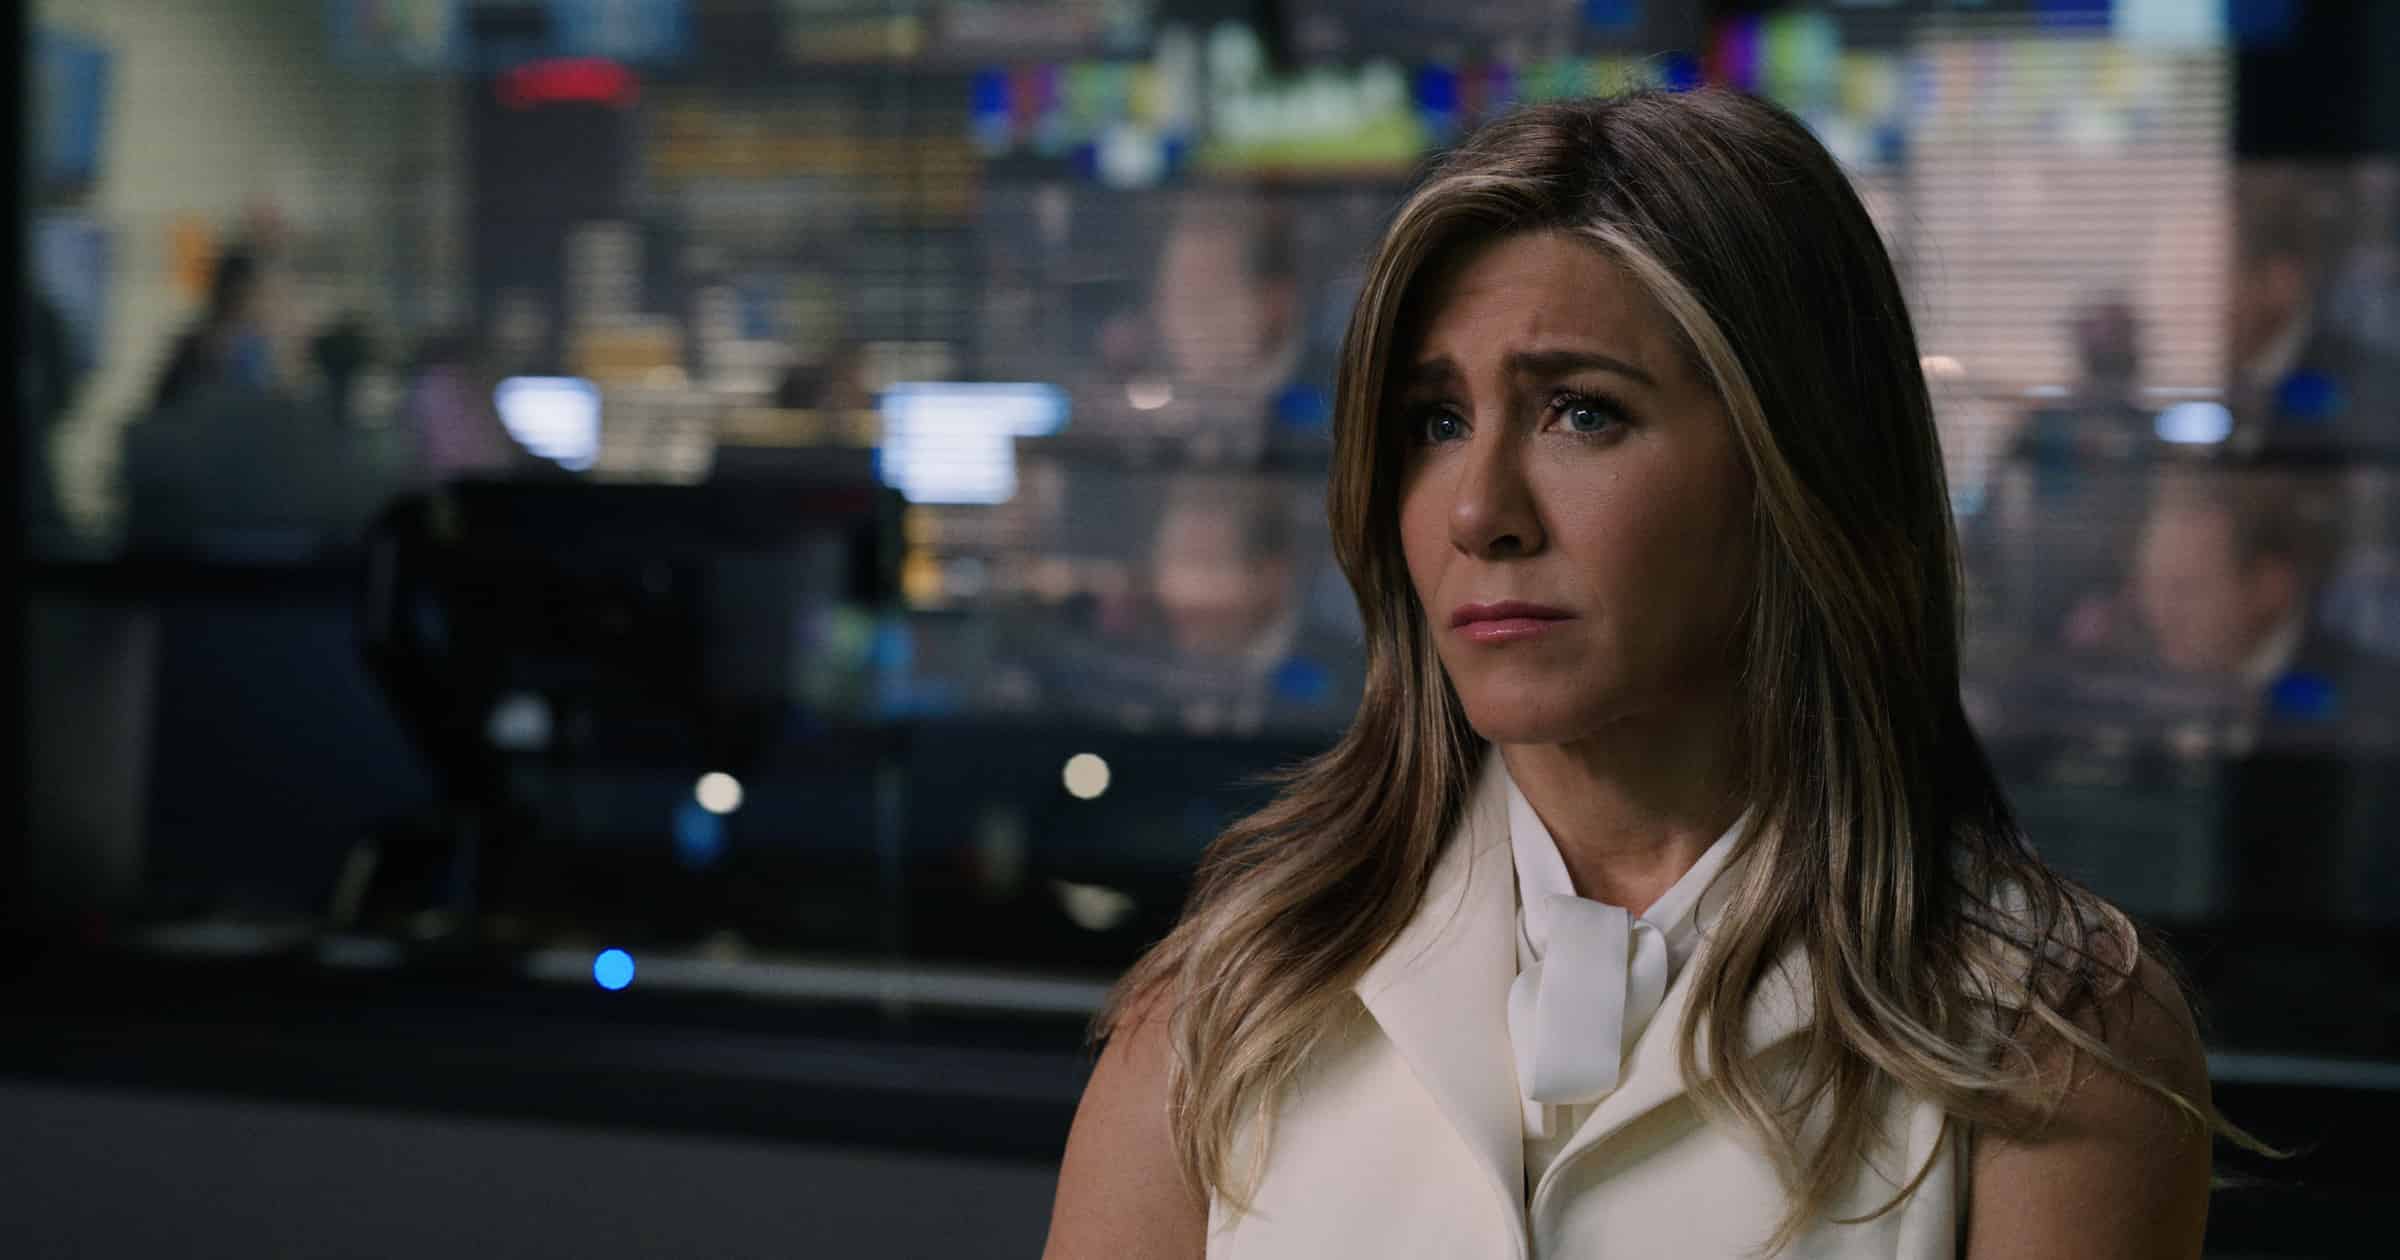 ‘Ted Lasso’, ‘On The Rocks’, Jennifer Aniston Receive AARP Movies For Grownups Awards Nominations